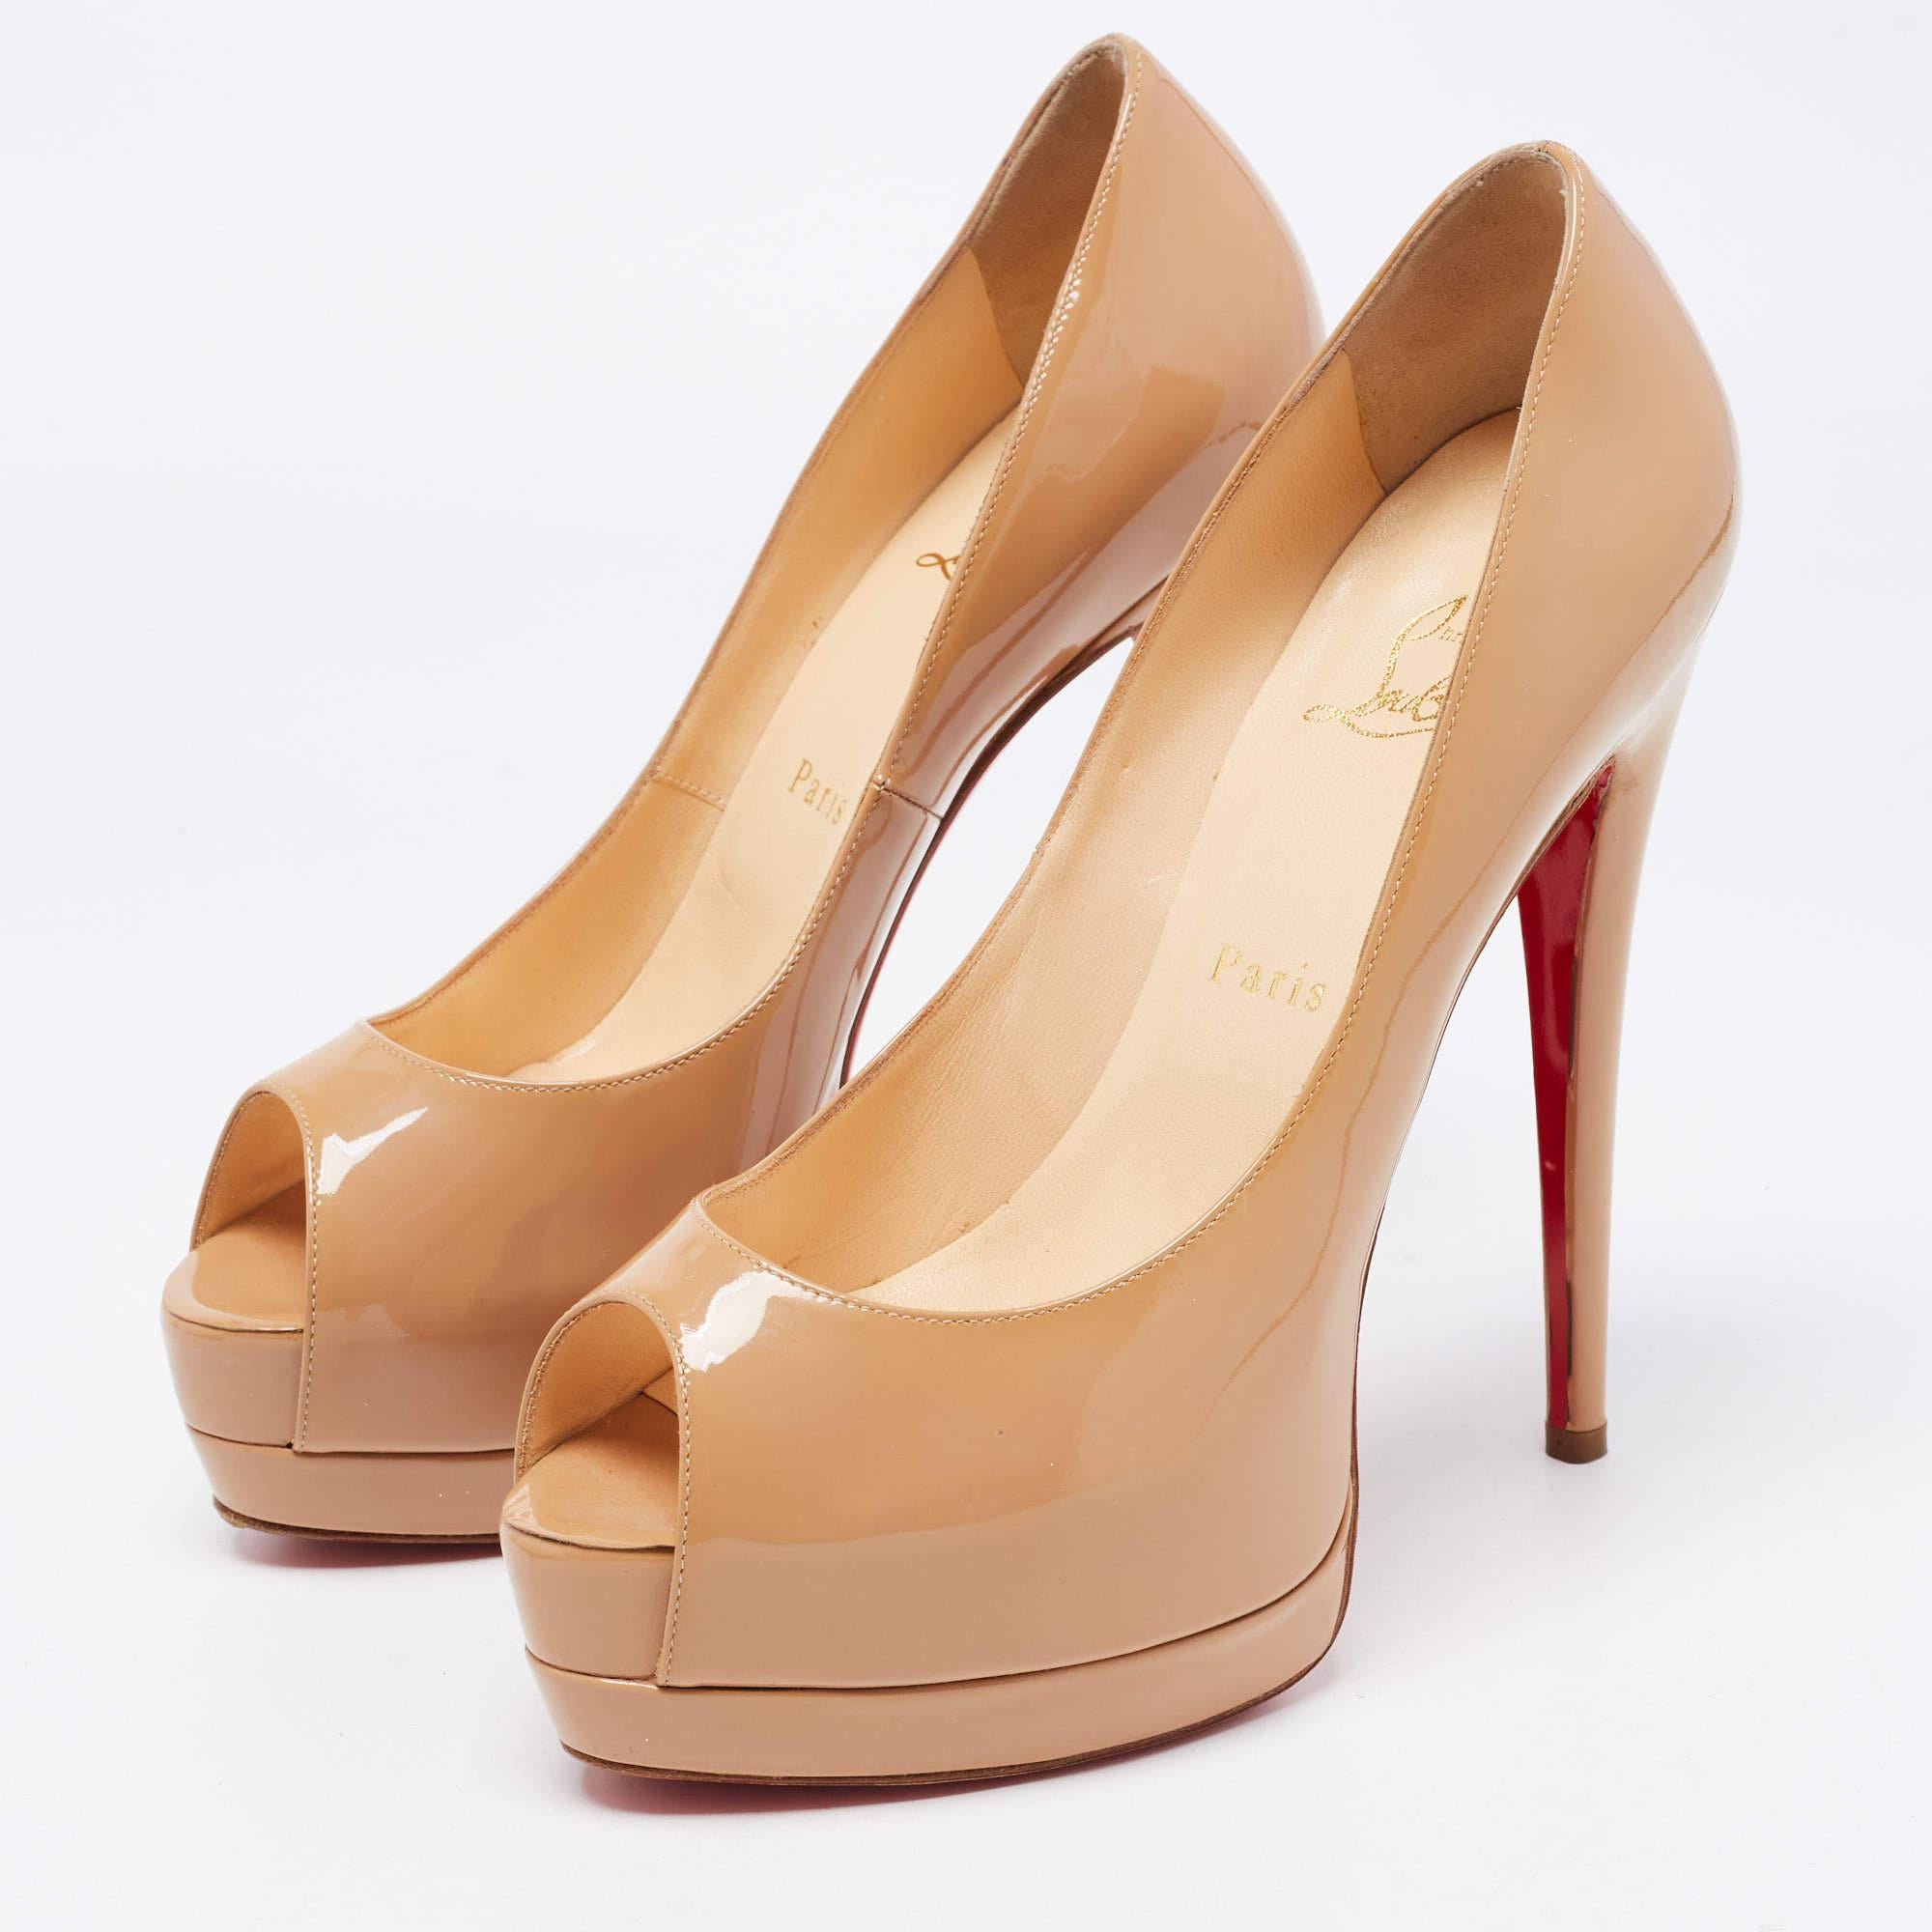 Christian Louboutin Beige Patent Very Prive Pumps Size 38 1